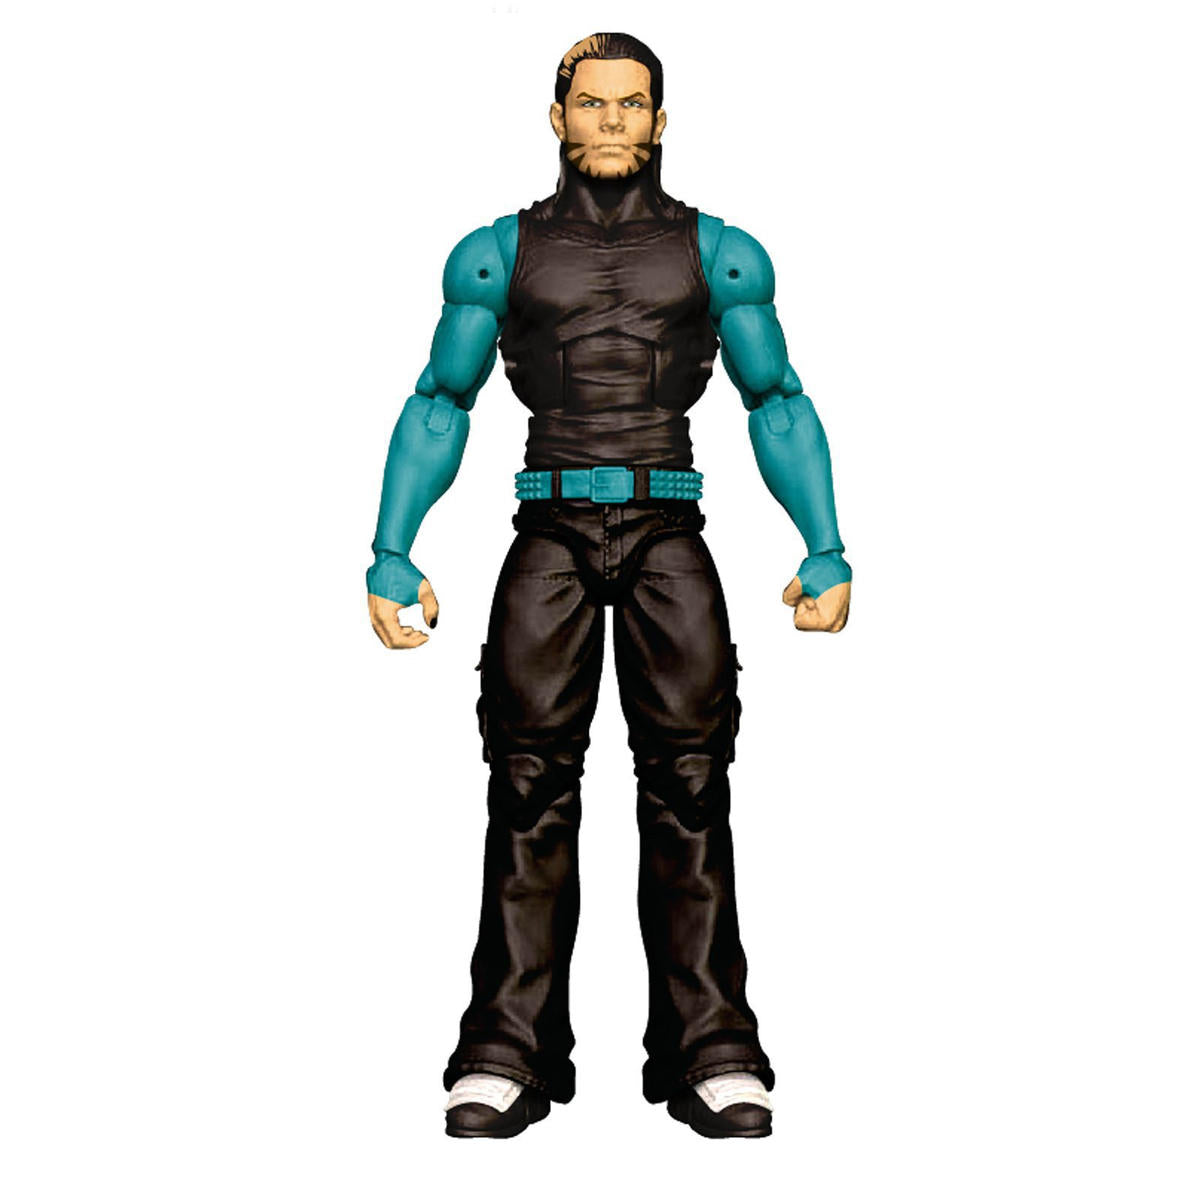 2018 WWE Mattel Elite Collection 2-Packs The Hardy Boyz [Exclusive]